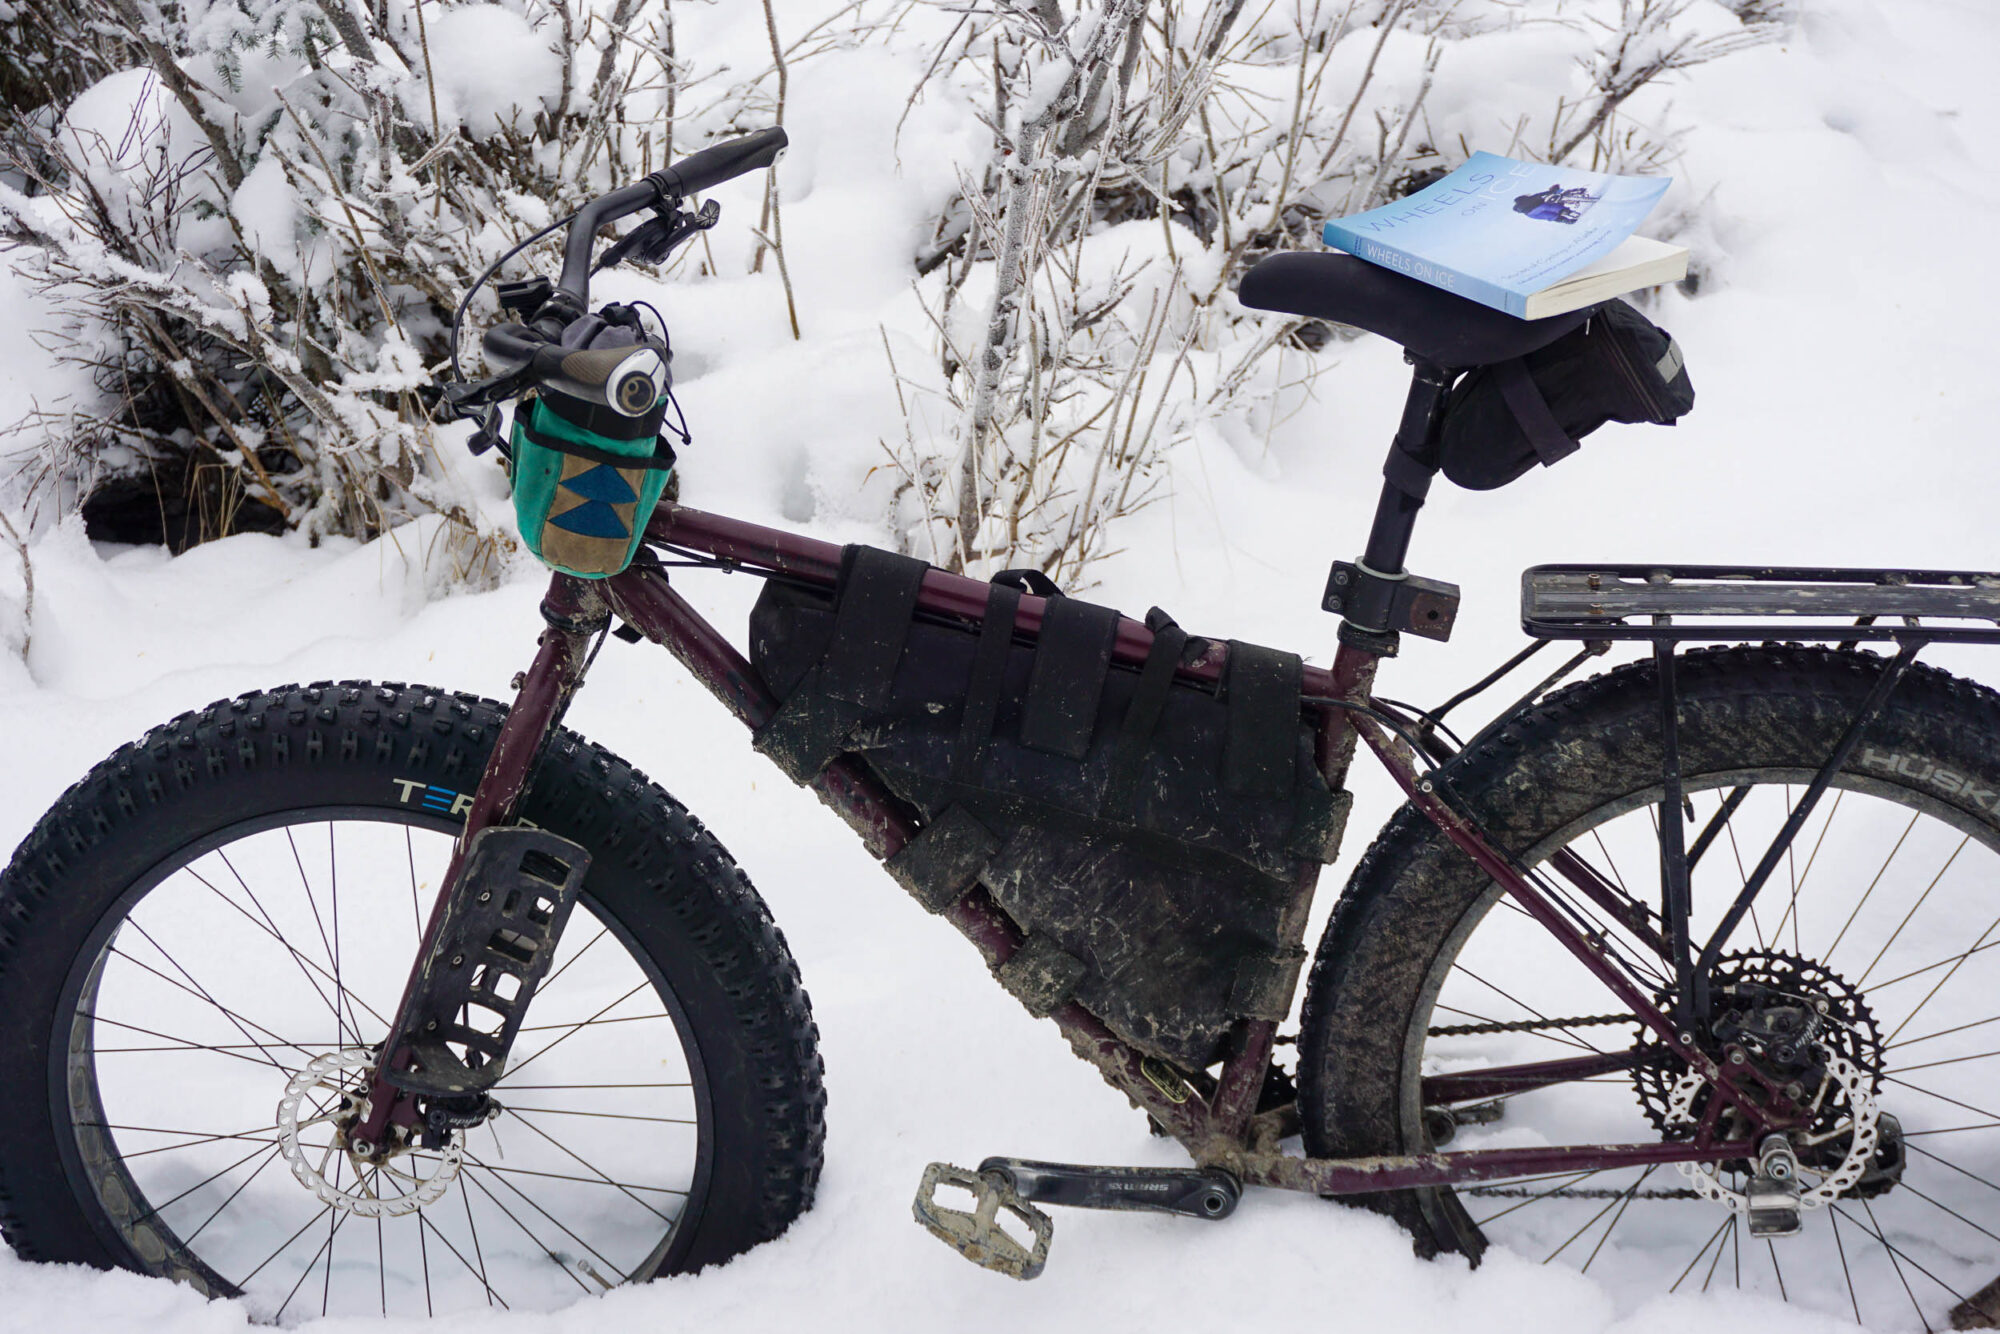 Wheels on Ice: Stories of Cycling in Alaska, Wheels on Ice Book Review